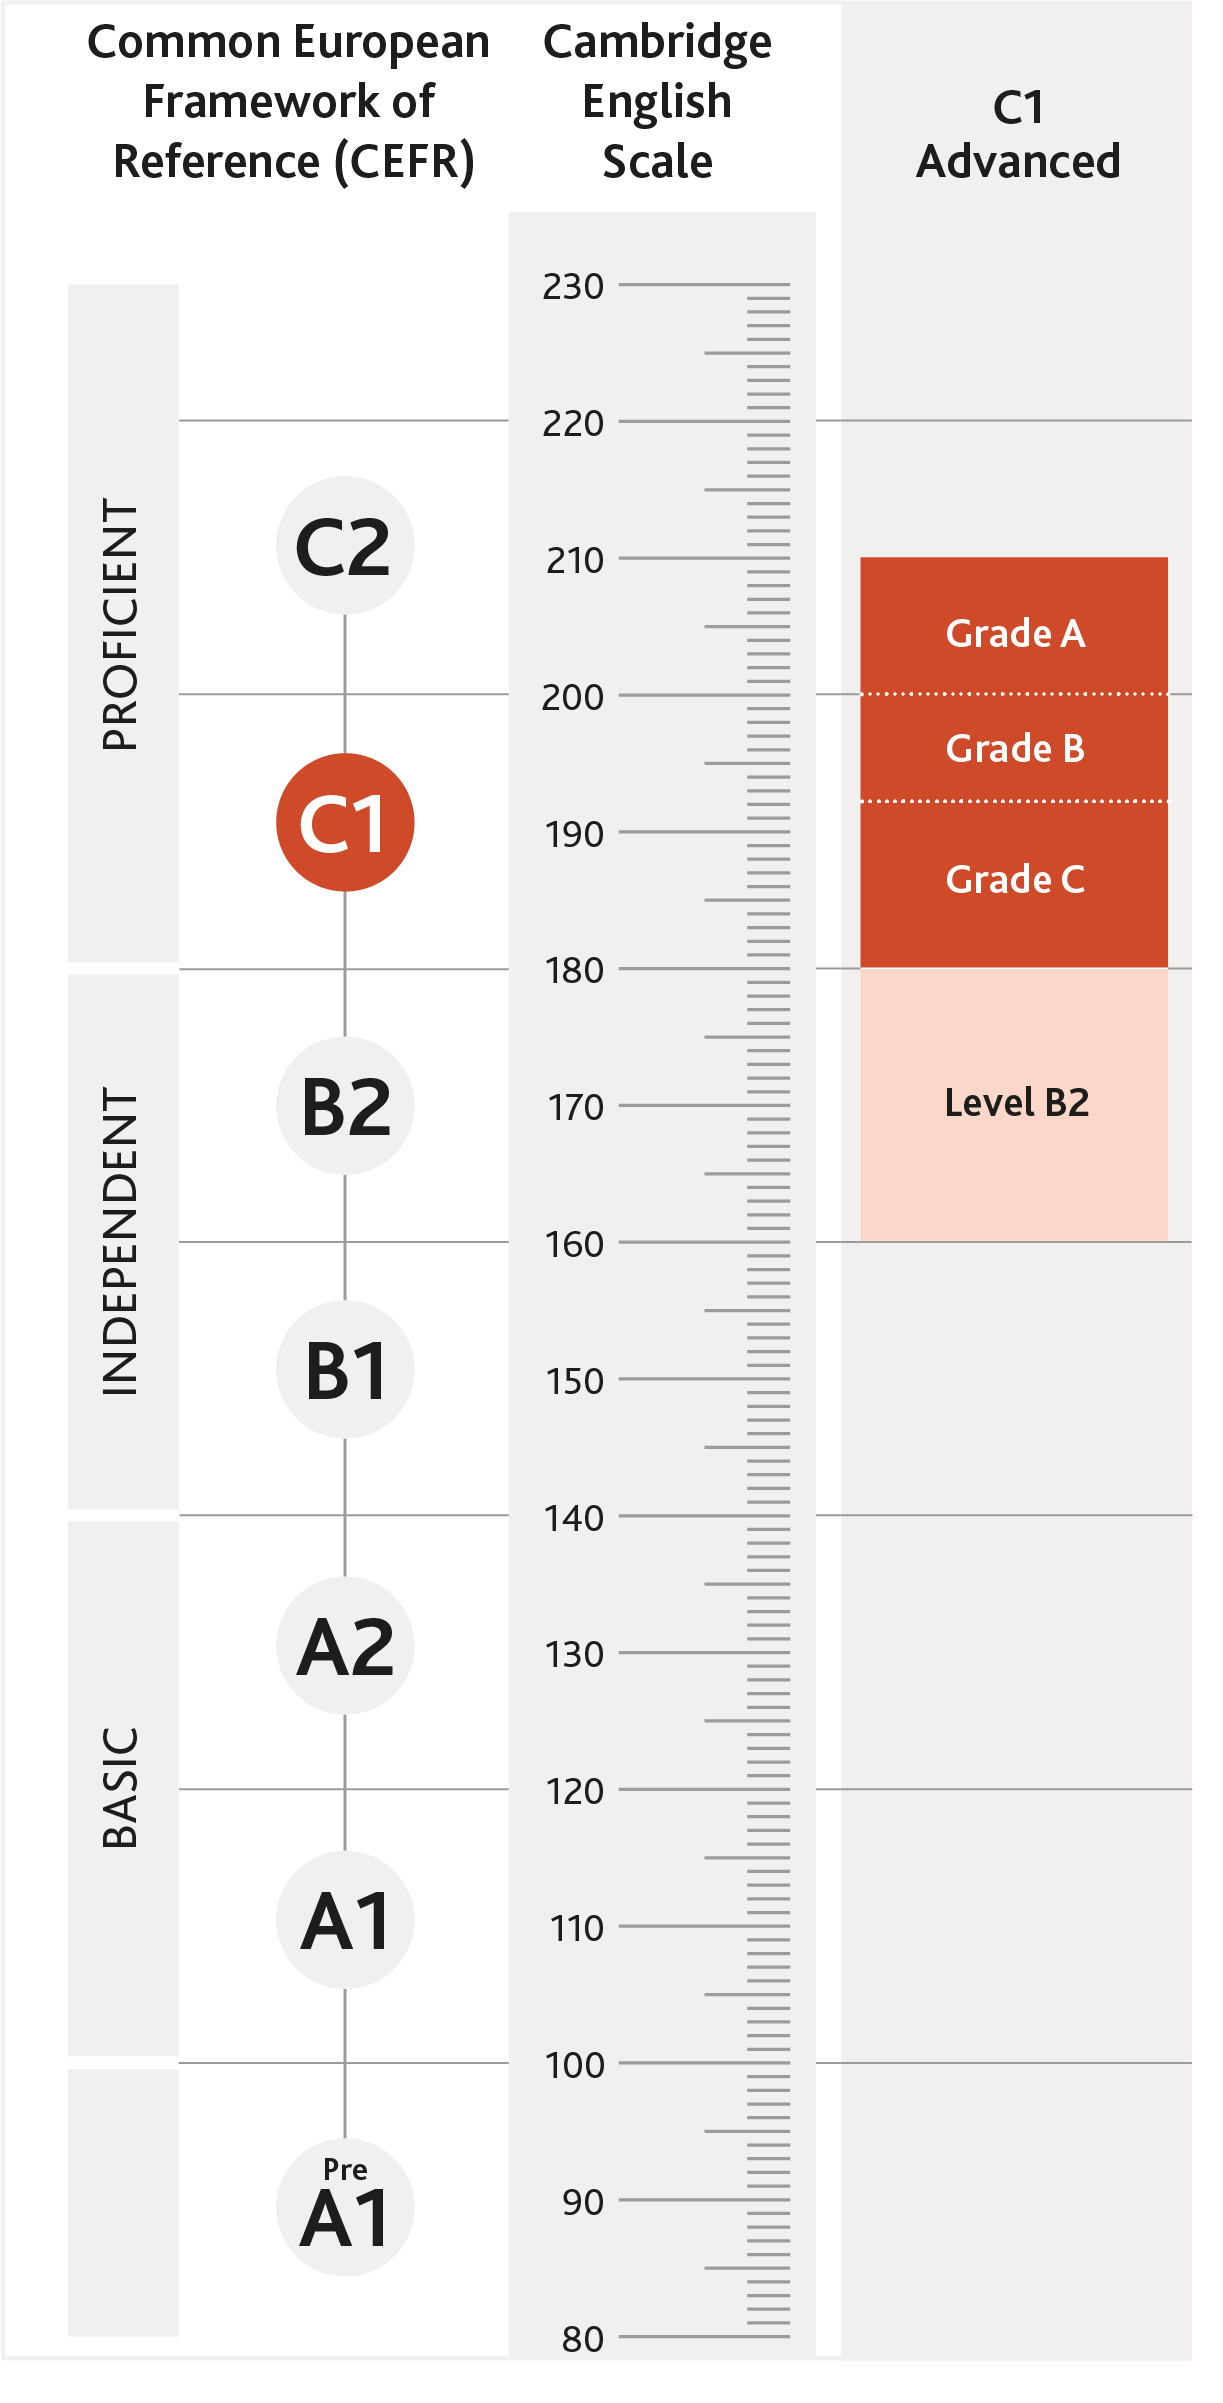 Diagram of where C1 Advanced is aligned on the CEFR and Cambridge English Scale